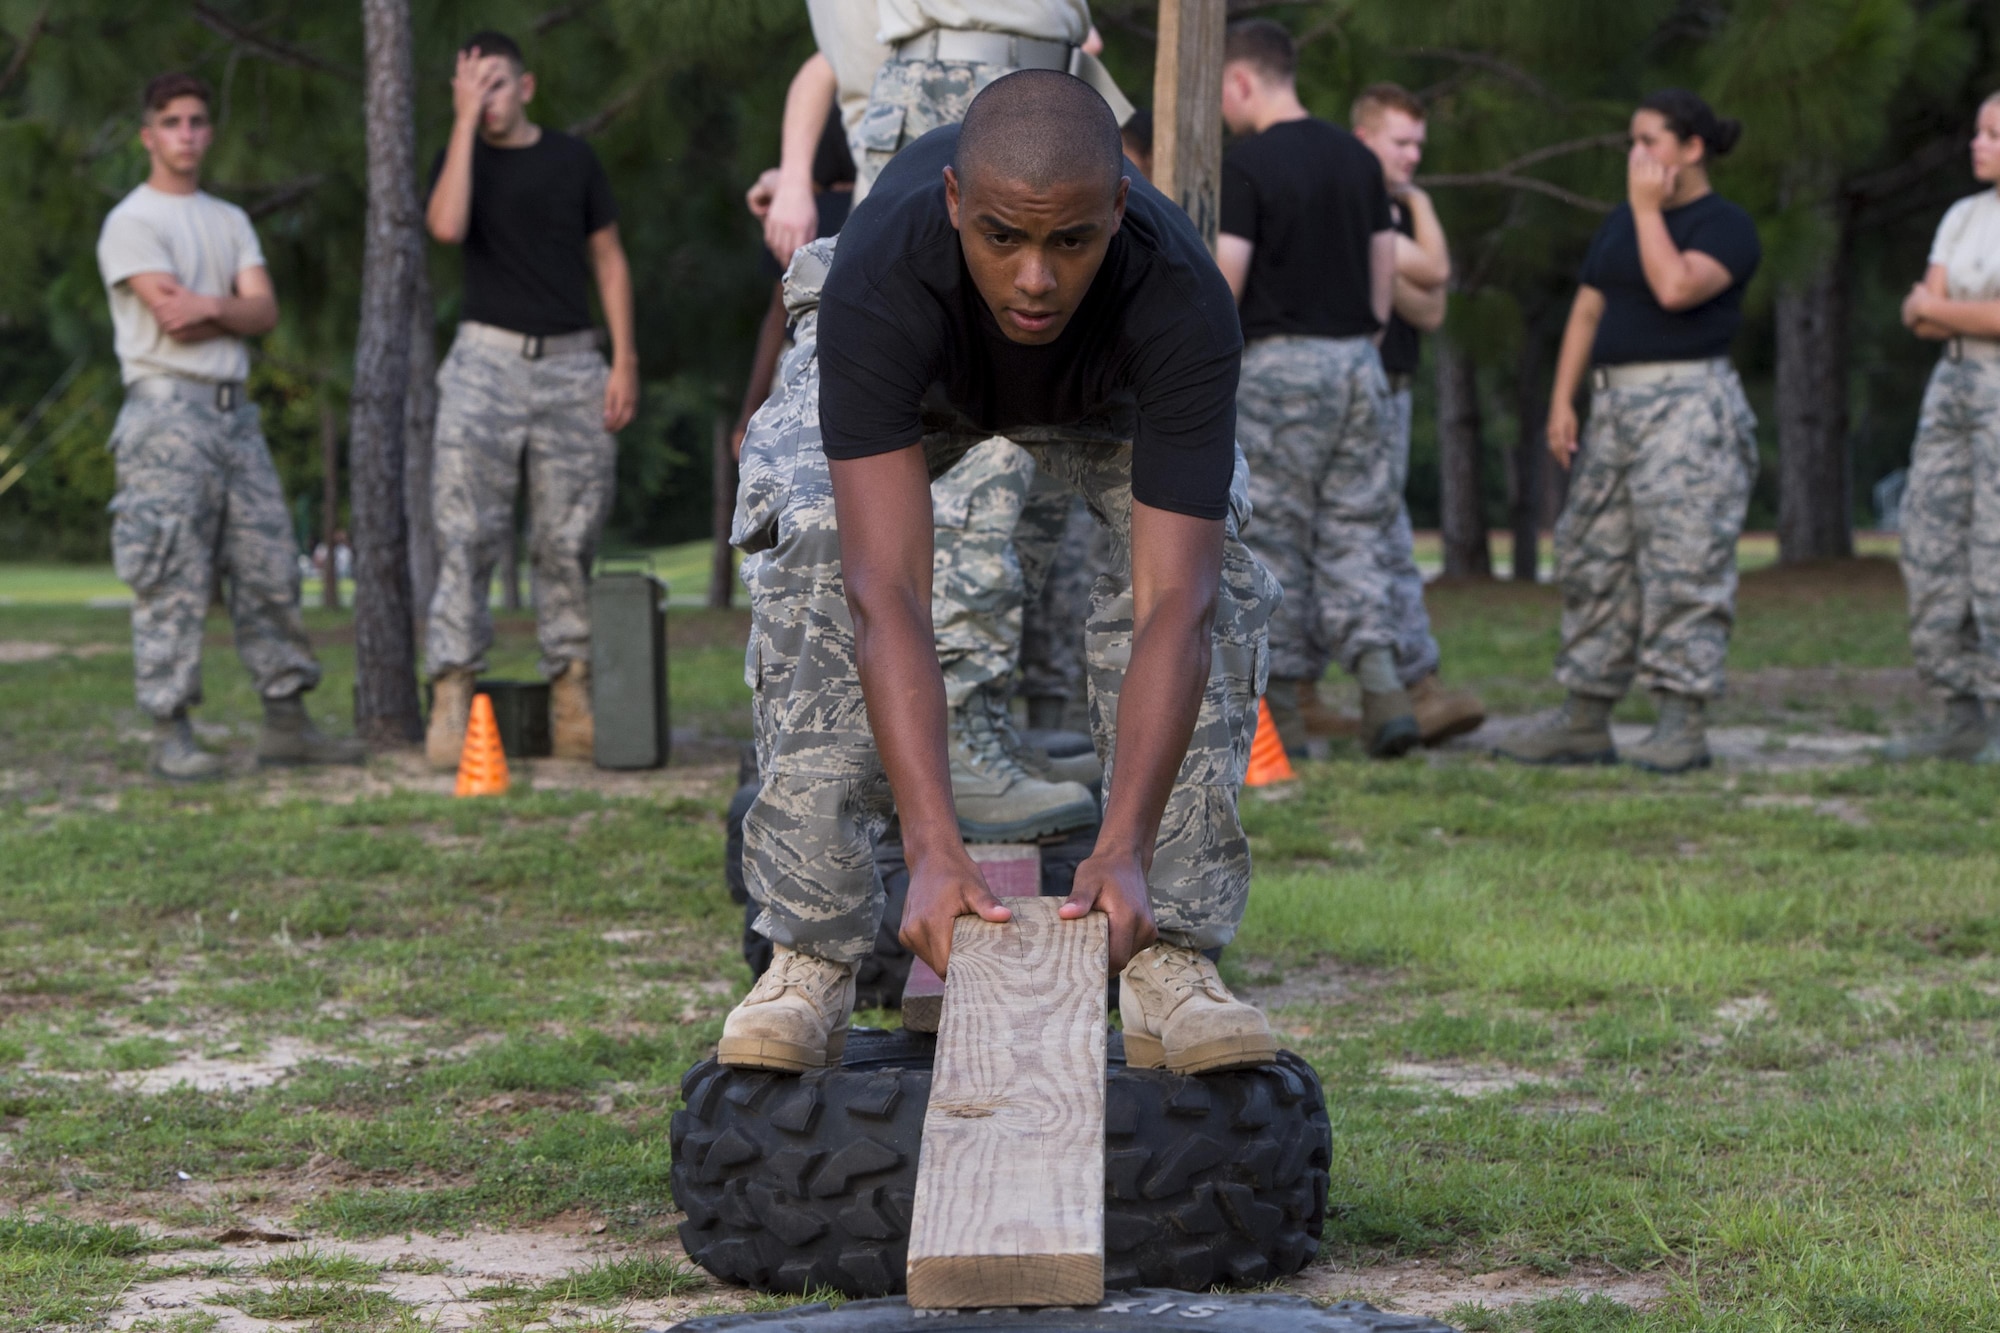 A Junior ROTC cadet lays a plank down to form a makeshift bridge between two tires during a team-building exercise at Hurlburt Field, Fla., June 26, 2017. More than 50 JROTC cadets from five local high schools engaged in a variety of team-building and leadership skill-developing exercises during a Summer Leadership School trip to Hurlburt Field, June 26 – 30. (U.S. Air Force photo by Staff Sgt. Victor J. Caputo)